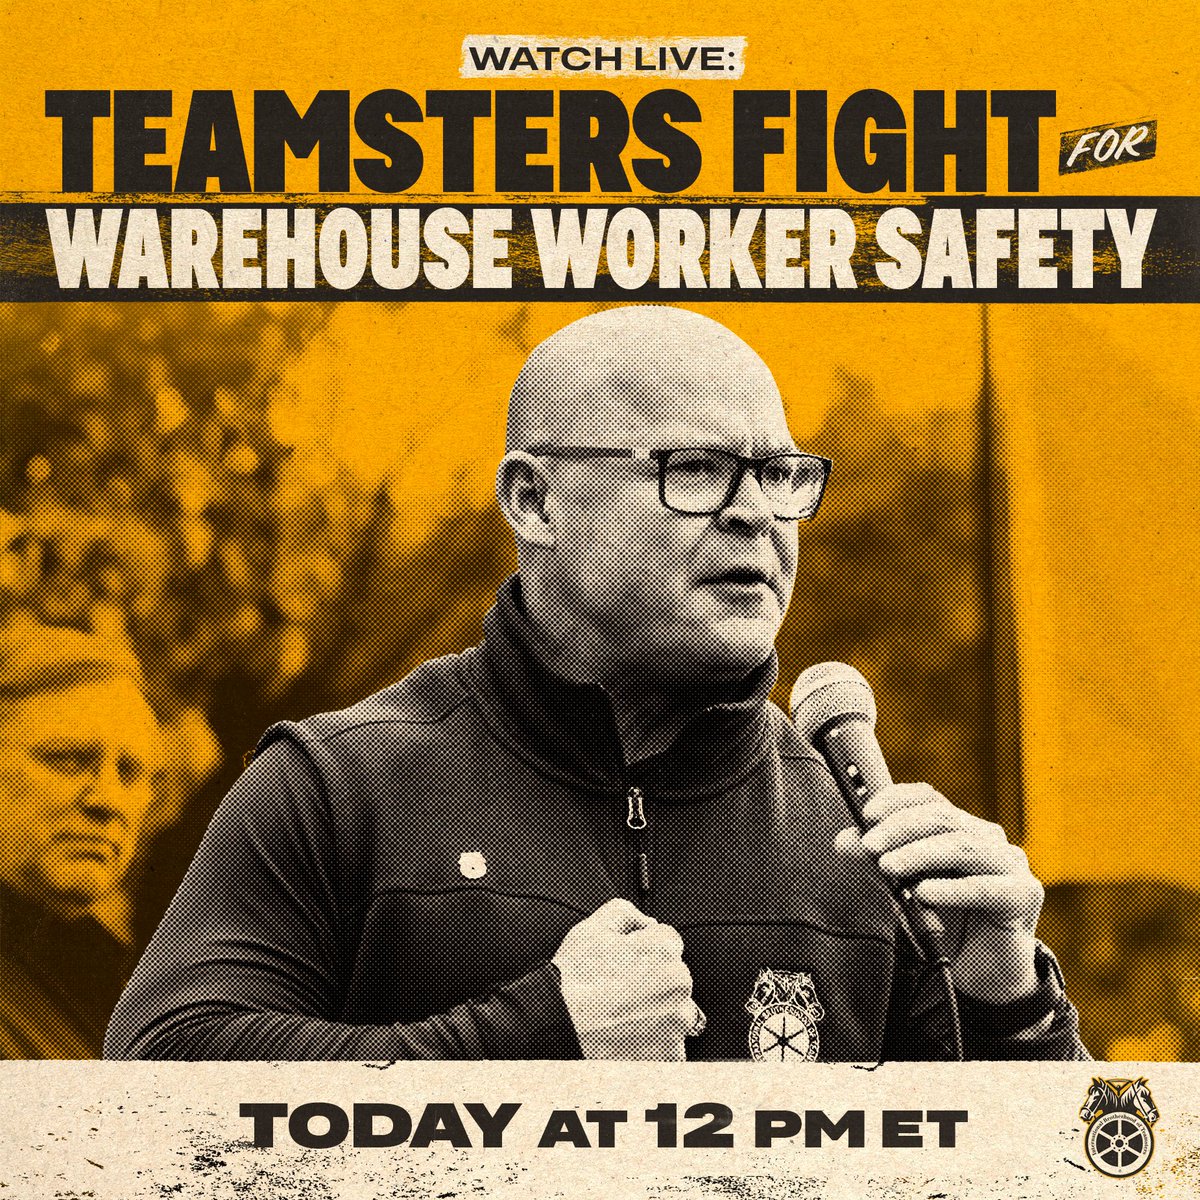 WATCH LIVE: TEAMSTERS, LAWMAKERS TO ANNOUNCE INTRODUCTION OF WAREHOUSE WORKER PROTECTION ACT Today at 12:00 pm ET, #Teamsters General President Sean M. O’Brien @TeamsterSOB, Warehouse Division Director Tom Erickson, @SenMarkey (D-MA), @SenTinaSmith (D-MN), and workers will…